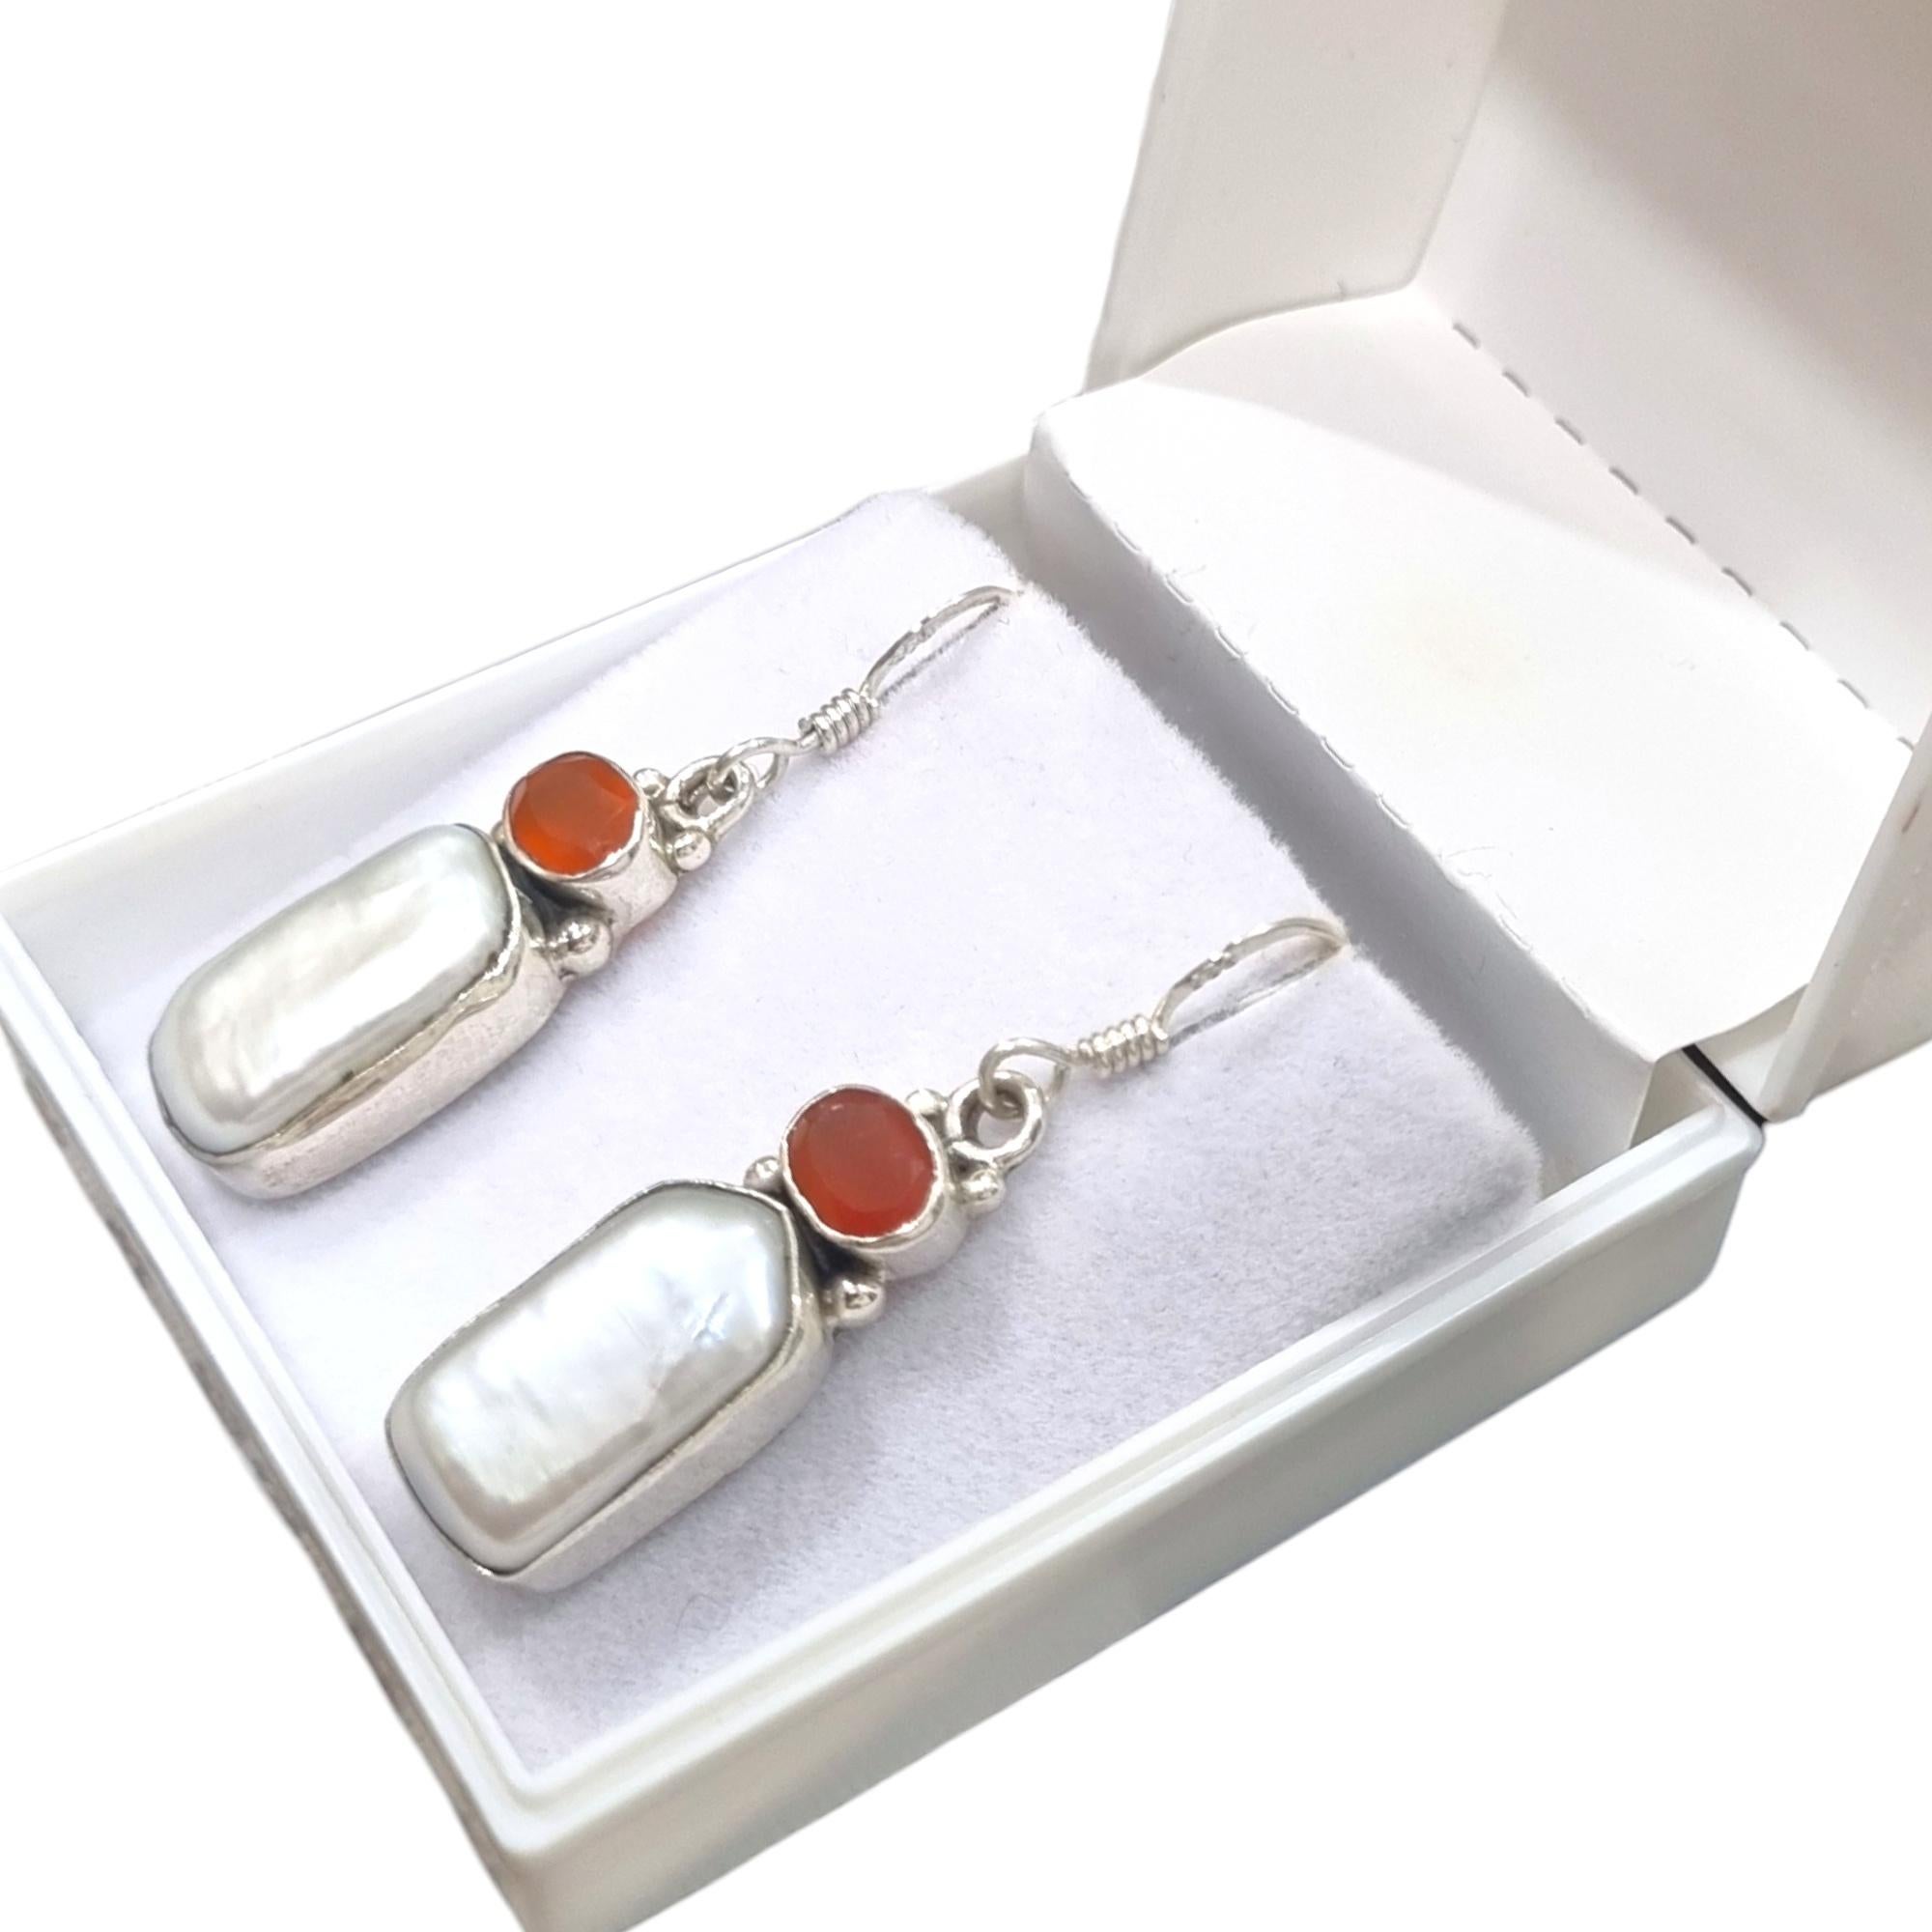 Metal - Sterling silver
Gross Weight - 7.23 Grams
Gemstones - Baroque pearls & orange tourmaline

Introducing our exquisite Oval Orange Cut Tourmaline and Baroque Pearls Earrings in Sterling Silver, a timeless blend of sophistication and natural